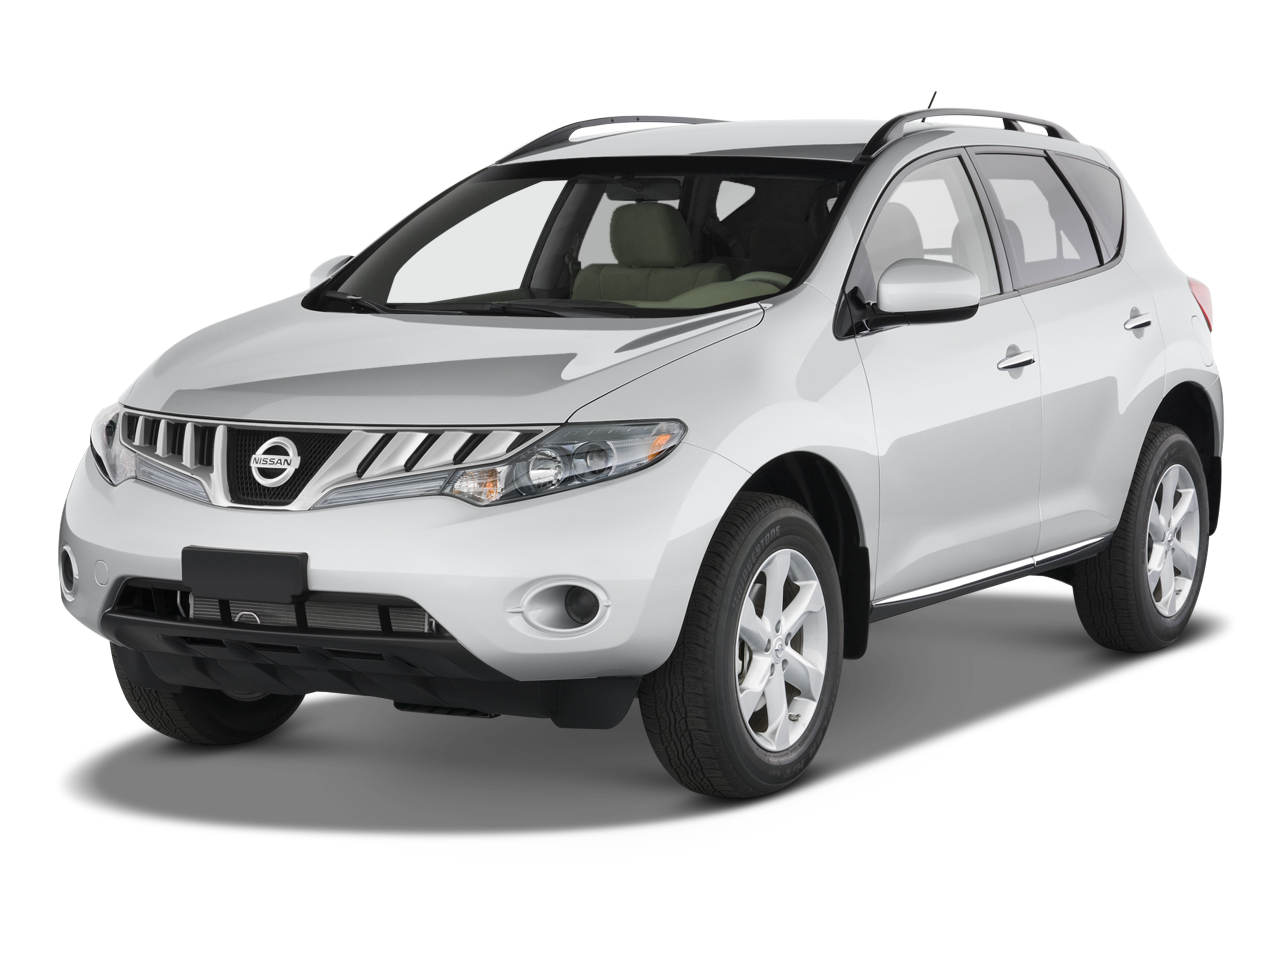 used 2010 Nissan Murano SL 4WD 4Dr SUV Fuel: 18 mpg city / 23 mpg hwy